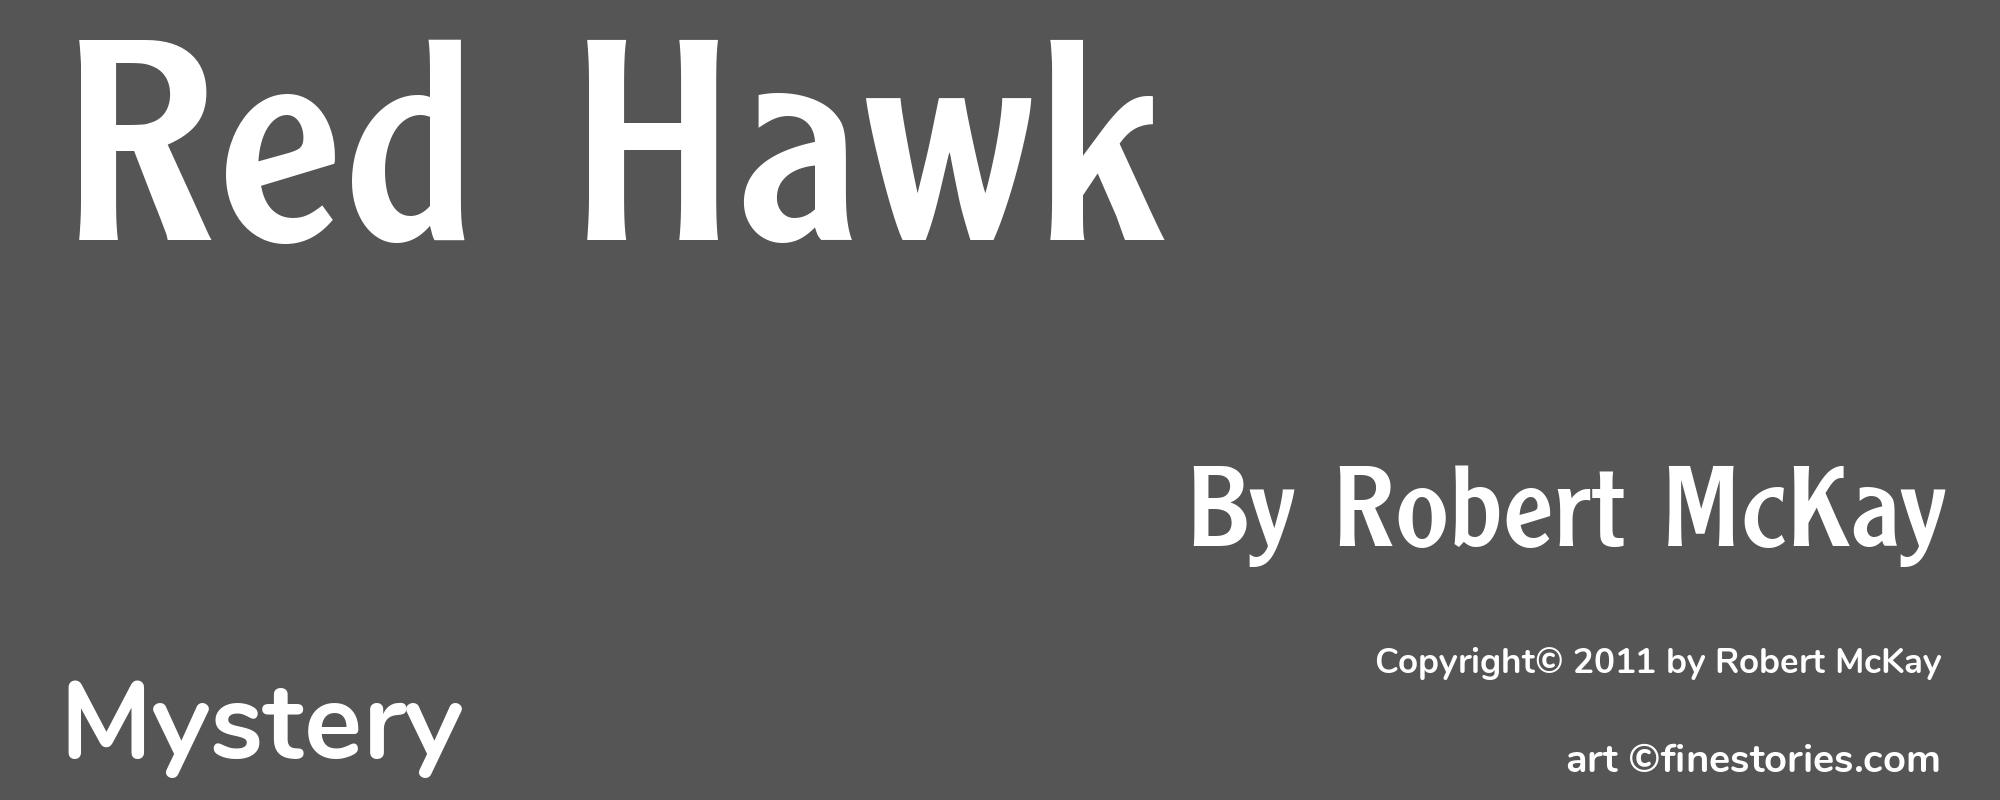 Red Hawk - Cover